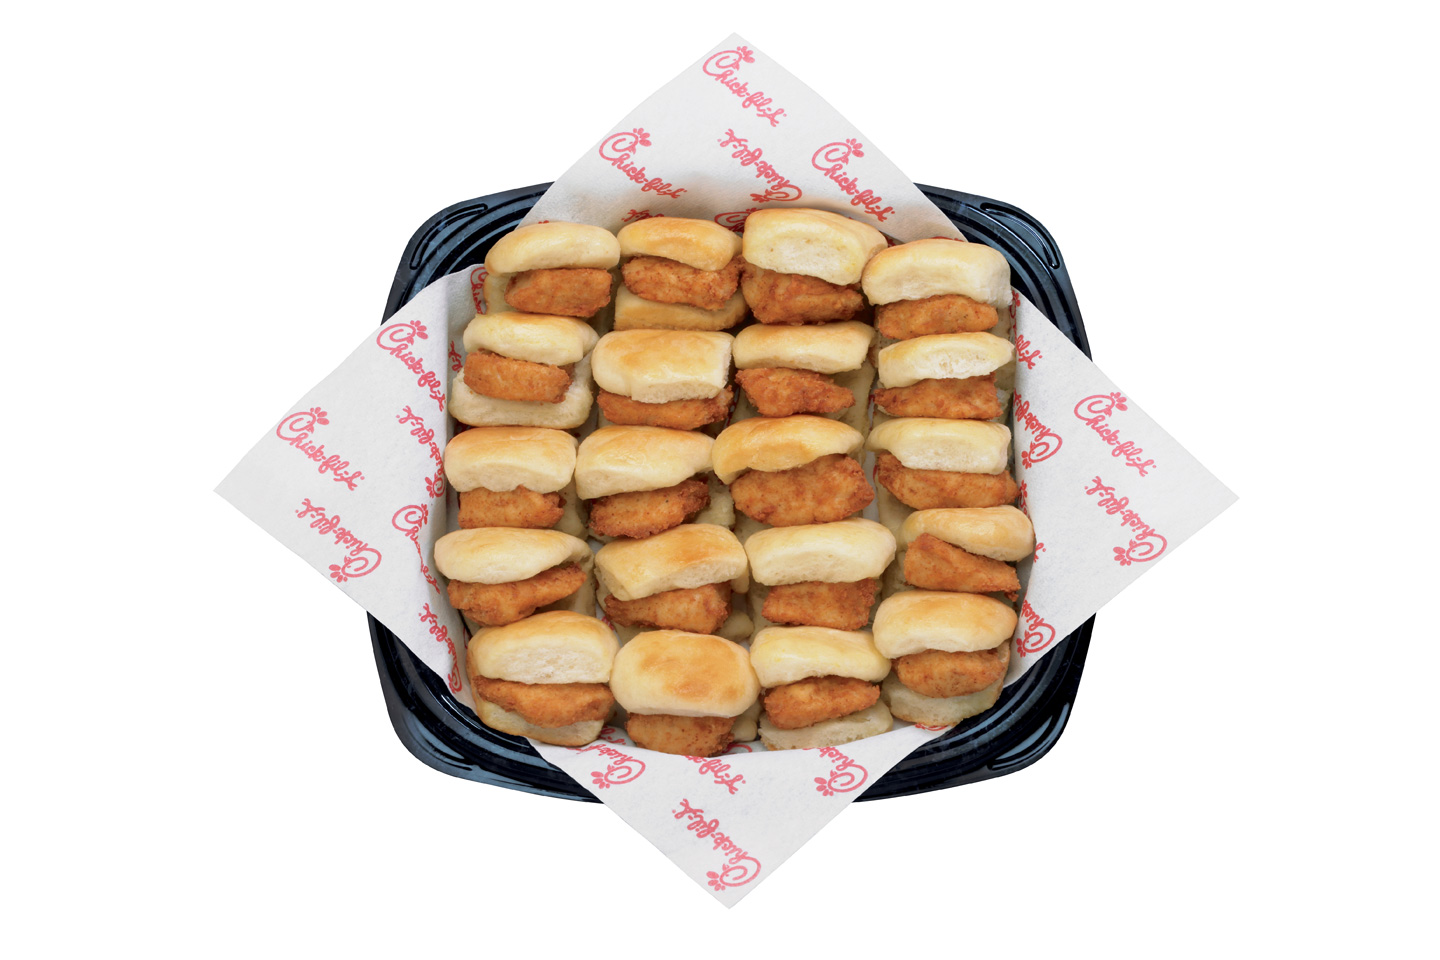 Chick Fil A Nugget Tray Small